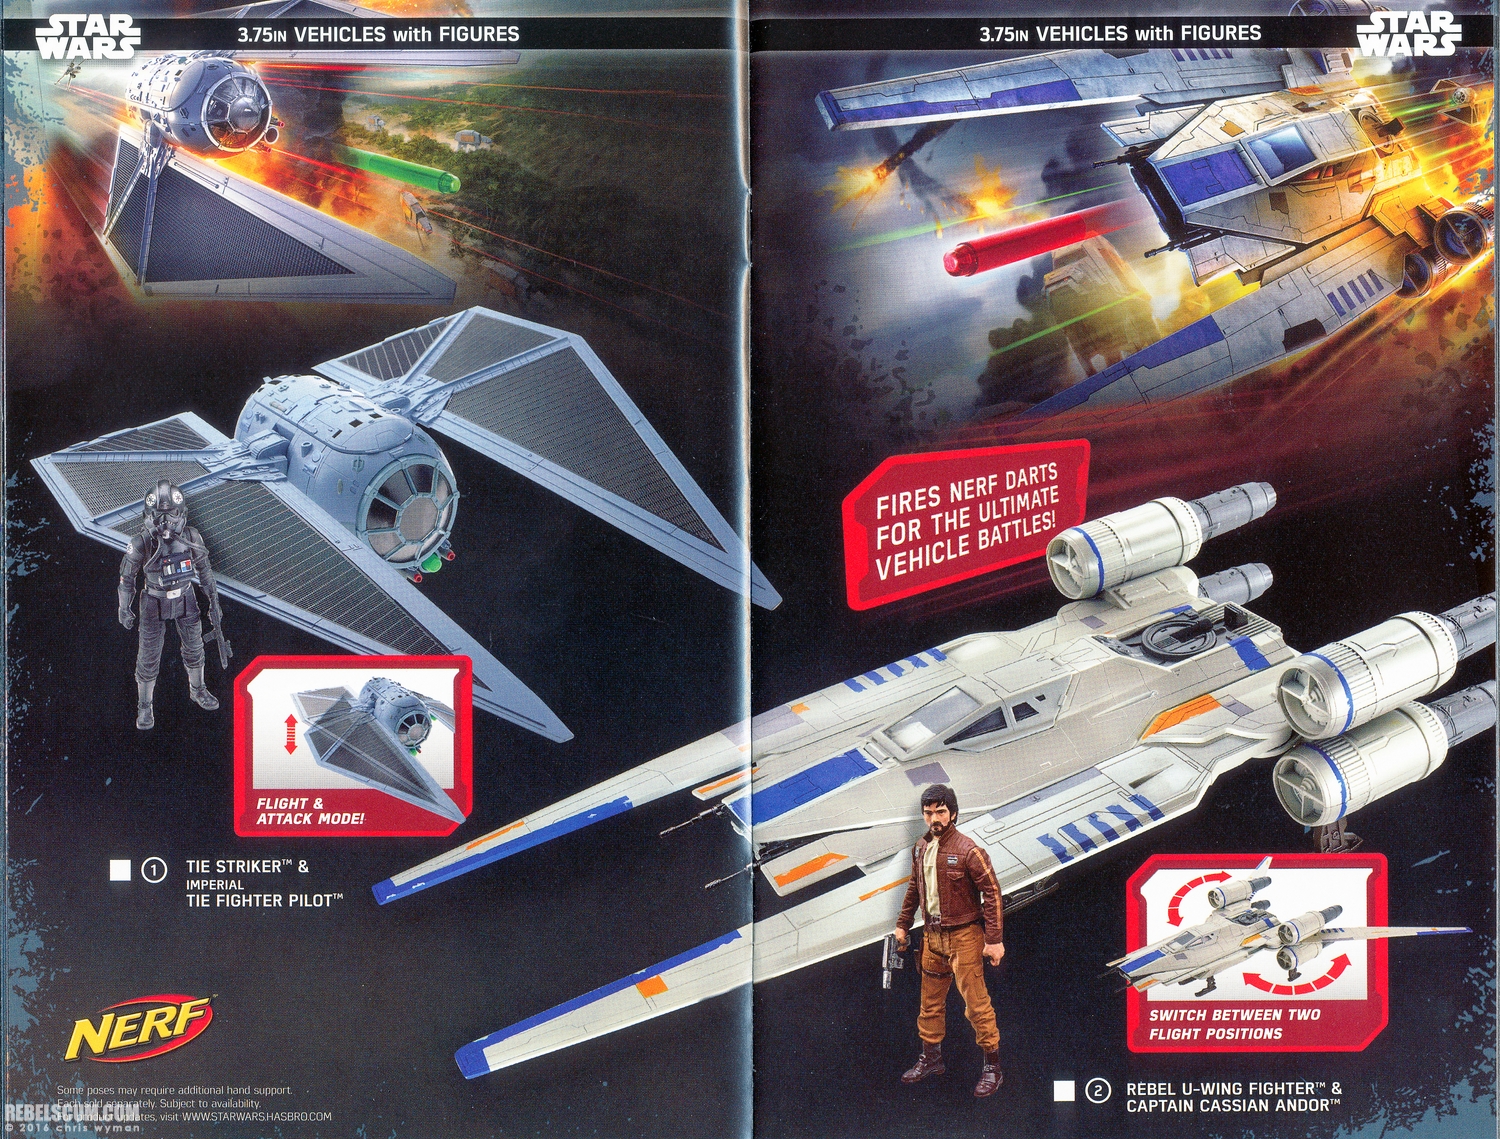 Hasbro-Your-Official-Rogue-One-Product-Guide-009.jpg